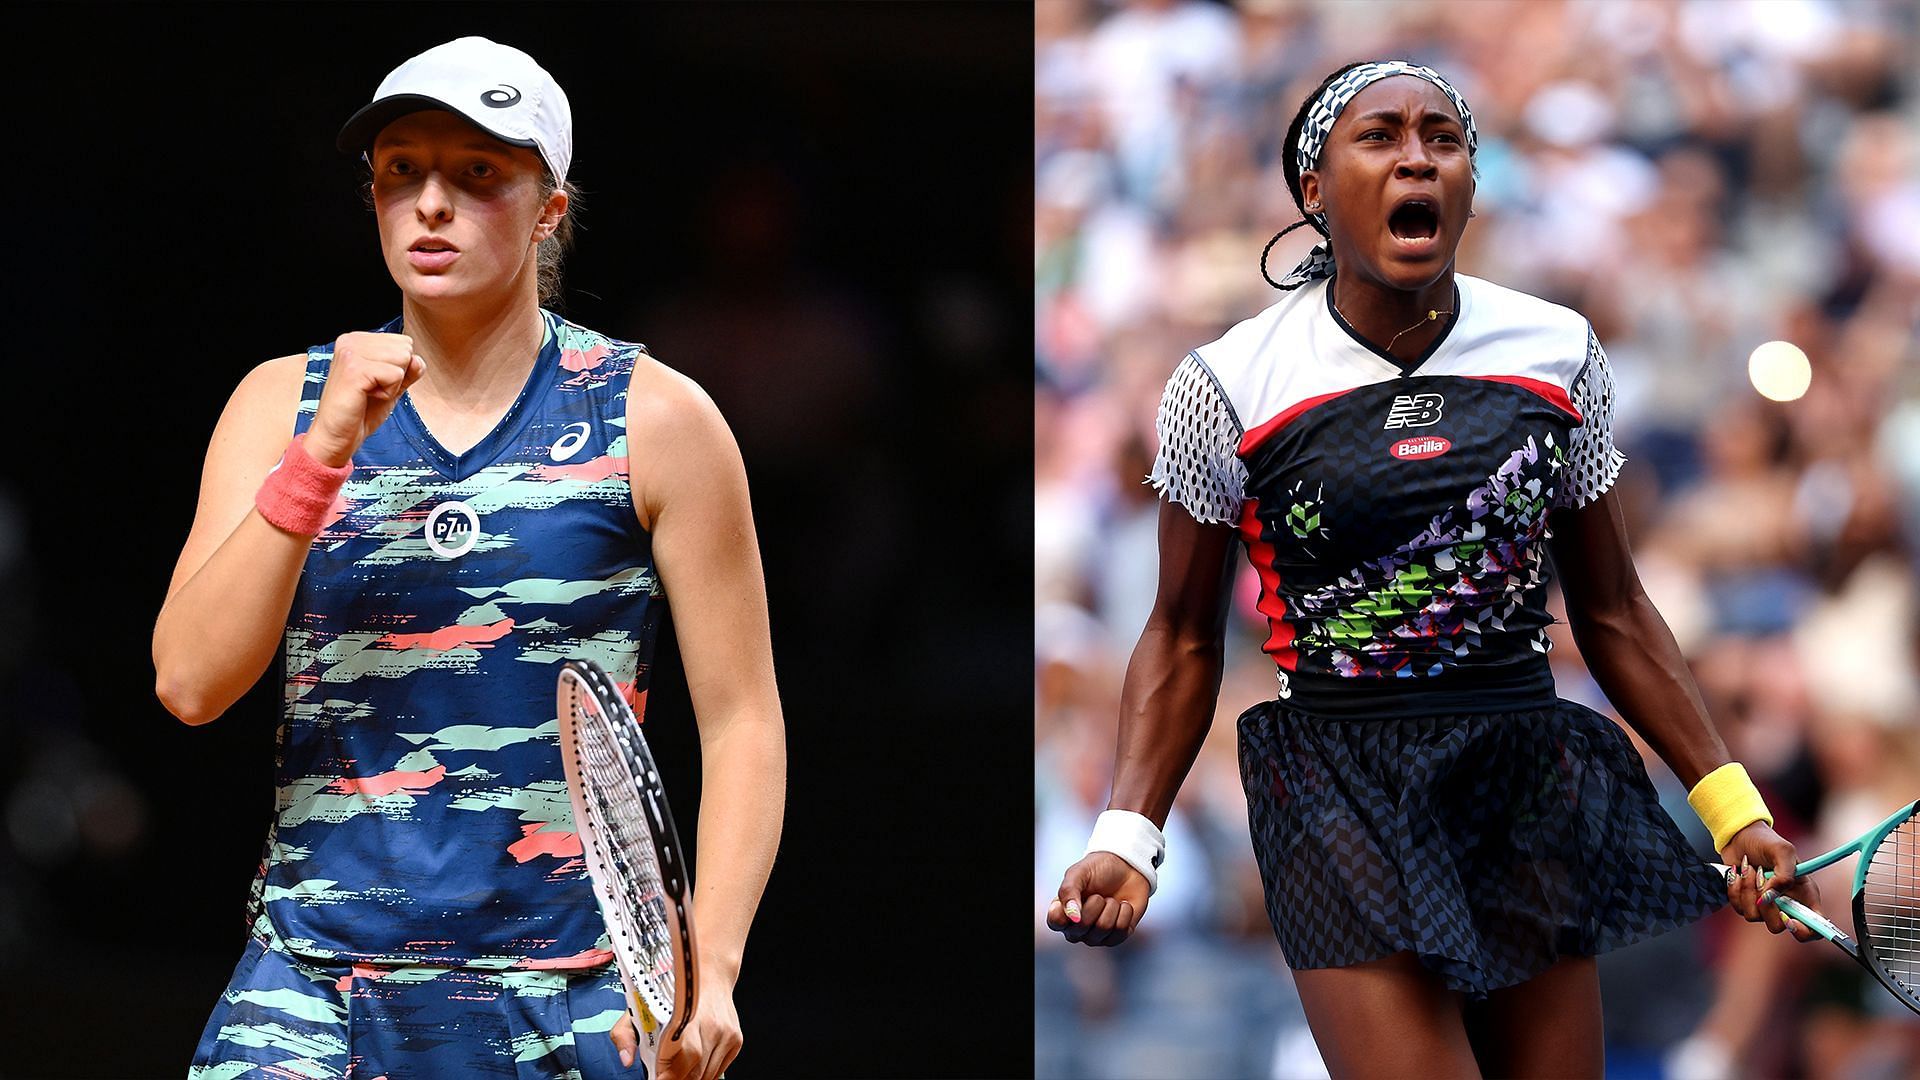 Iga Swiatek and Coco Gauff will lock horns in the quarterfinals of the French Open